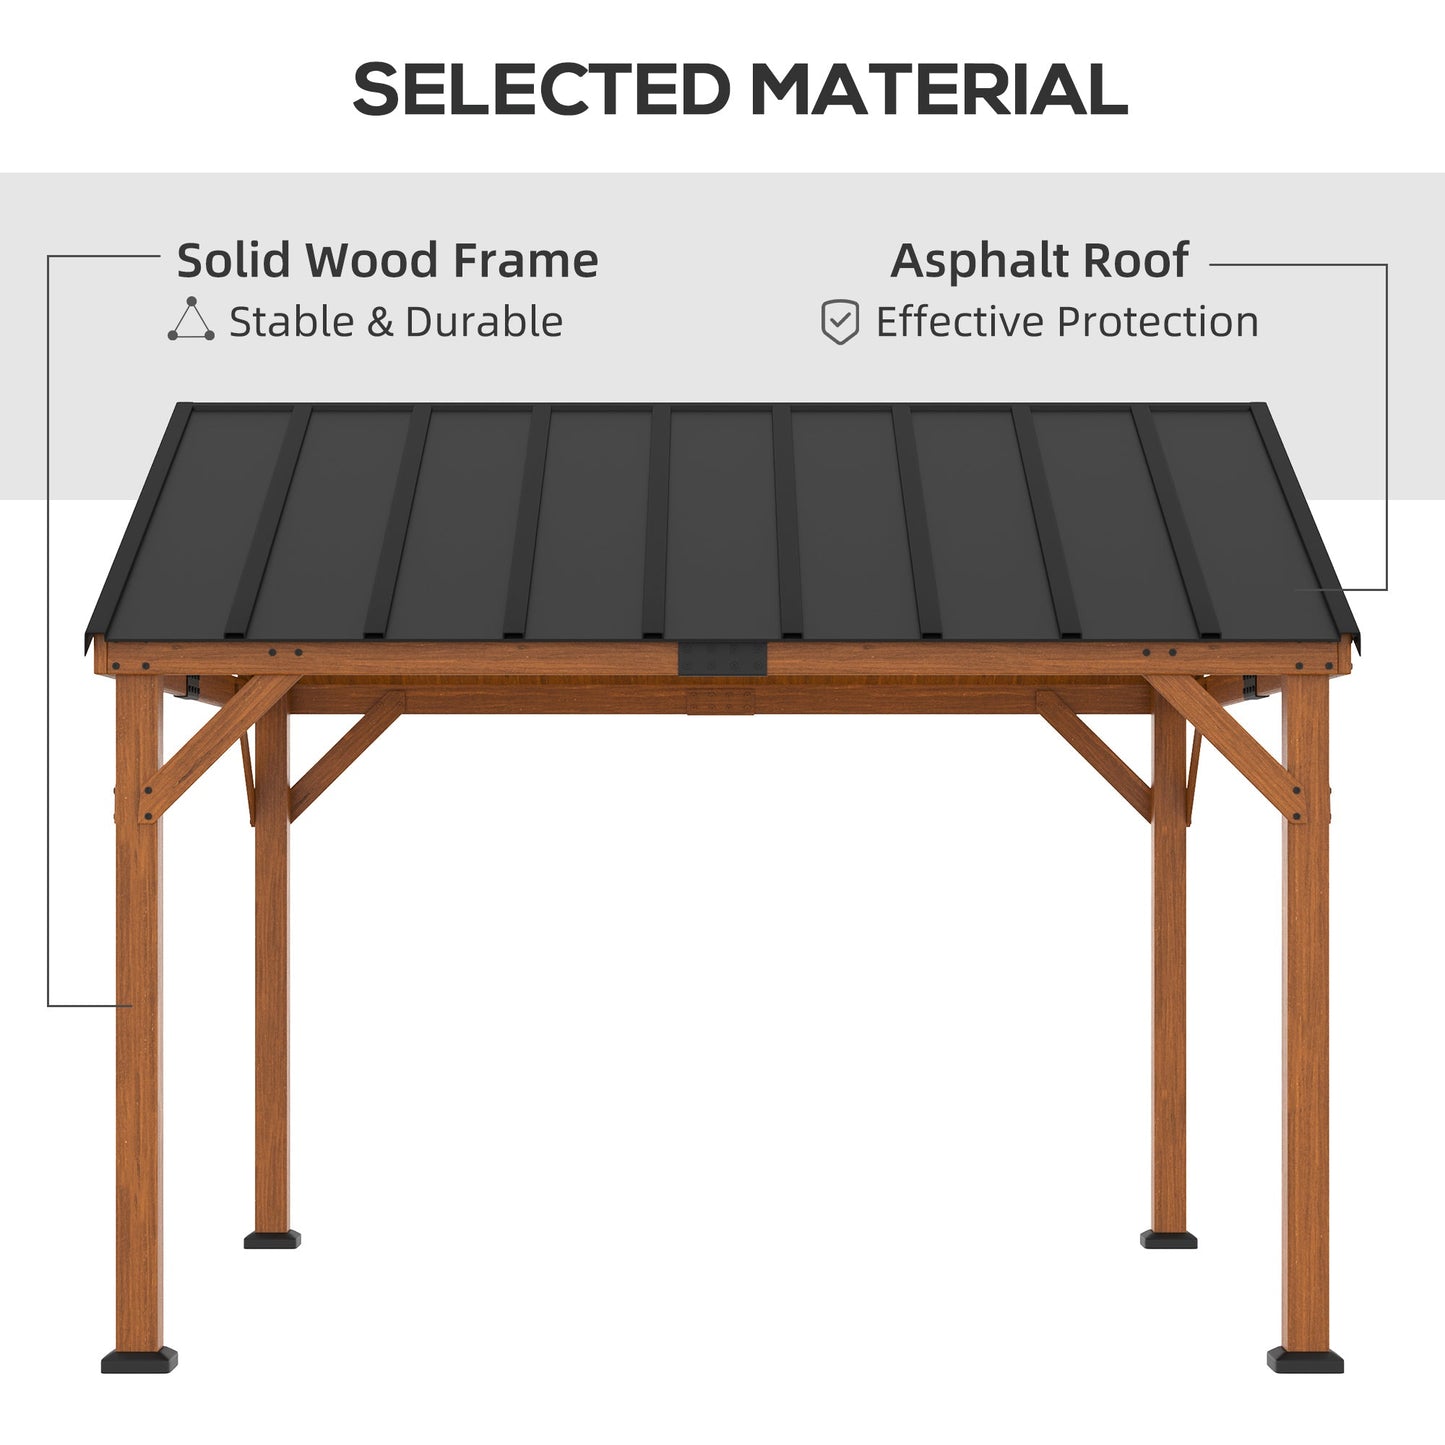 Outdoor and Garden-12' x 11' Hardtop Gazebo with Wooden Frame and Waterproof Asphalt Roof, Gazebo Canopy, for Garden, Patio, Backyard, Deck, Porch, Brown - Outdoor Style Company